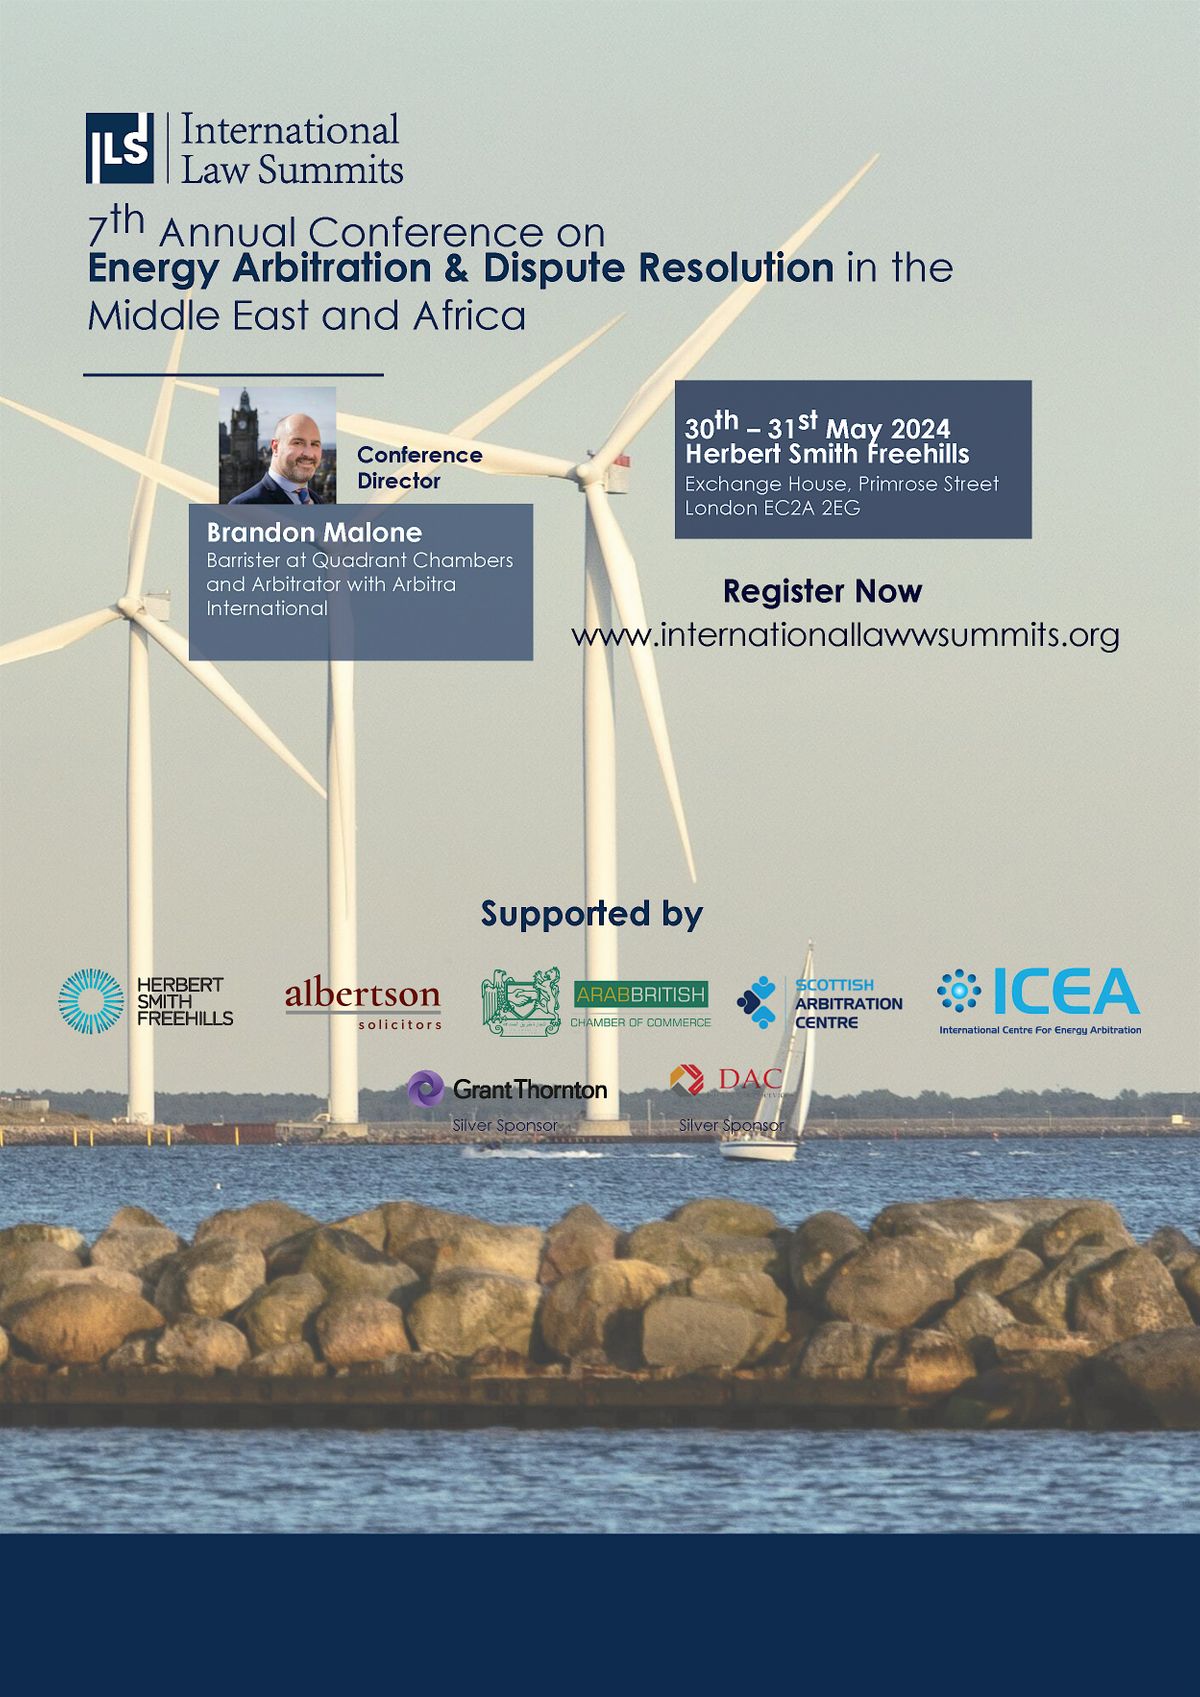 7th Annual Conference on Energy Arbitration & Dispute Resolution in MEA